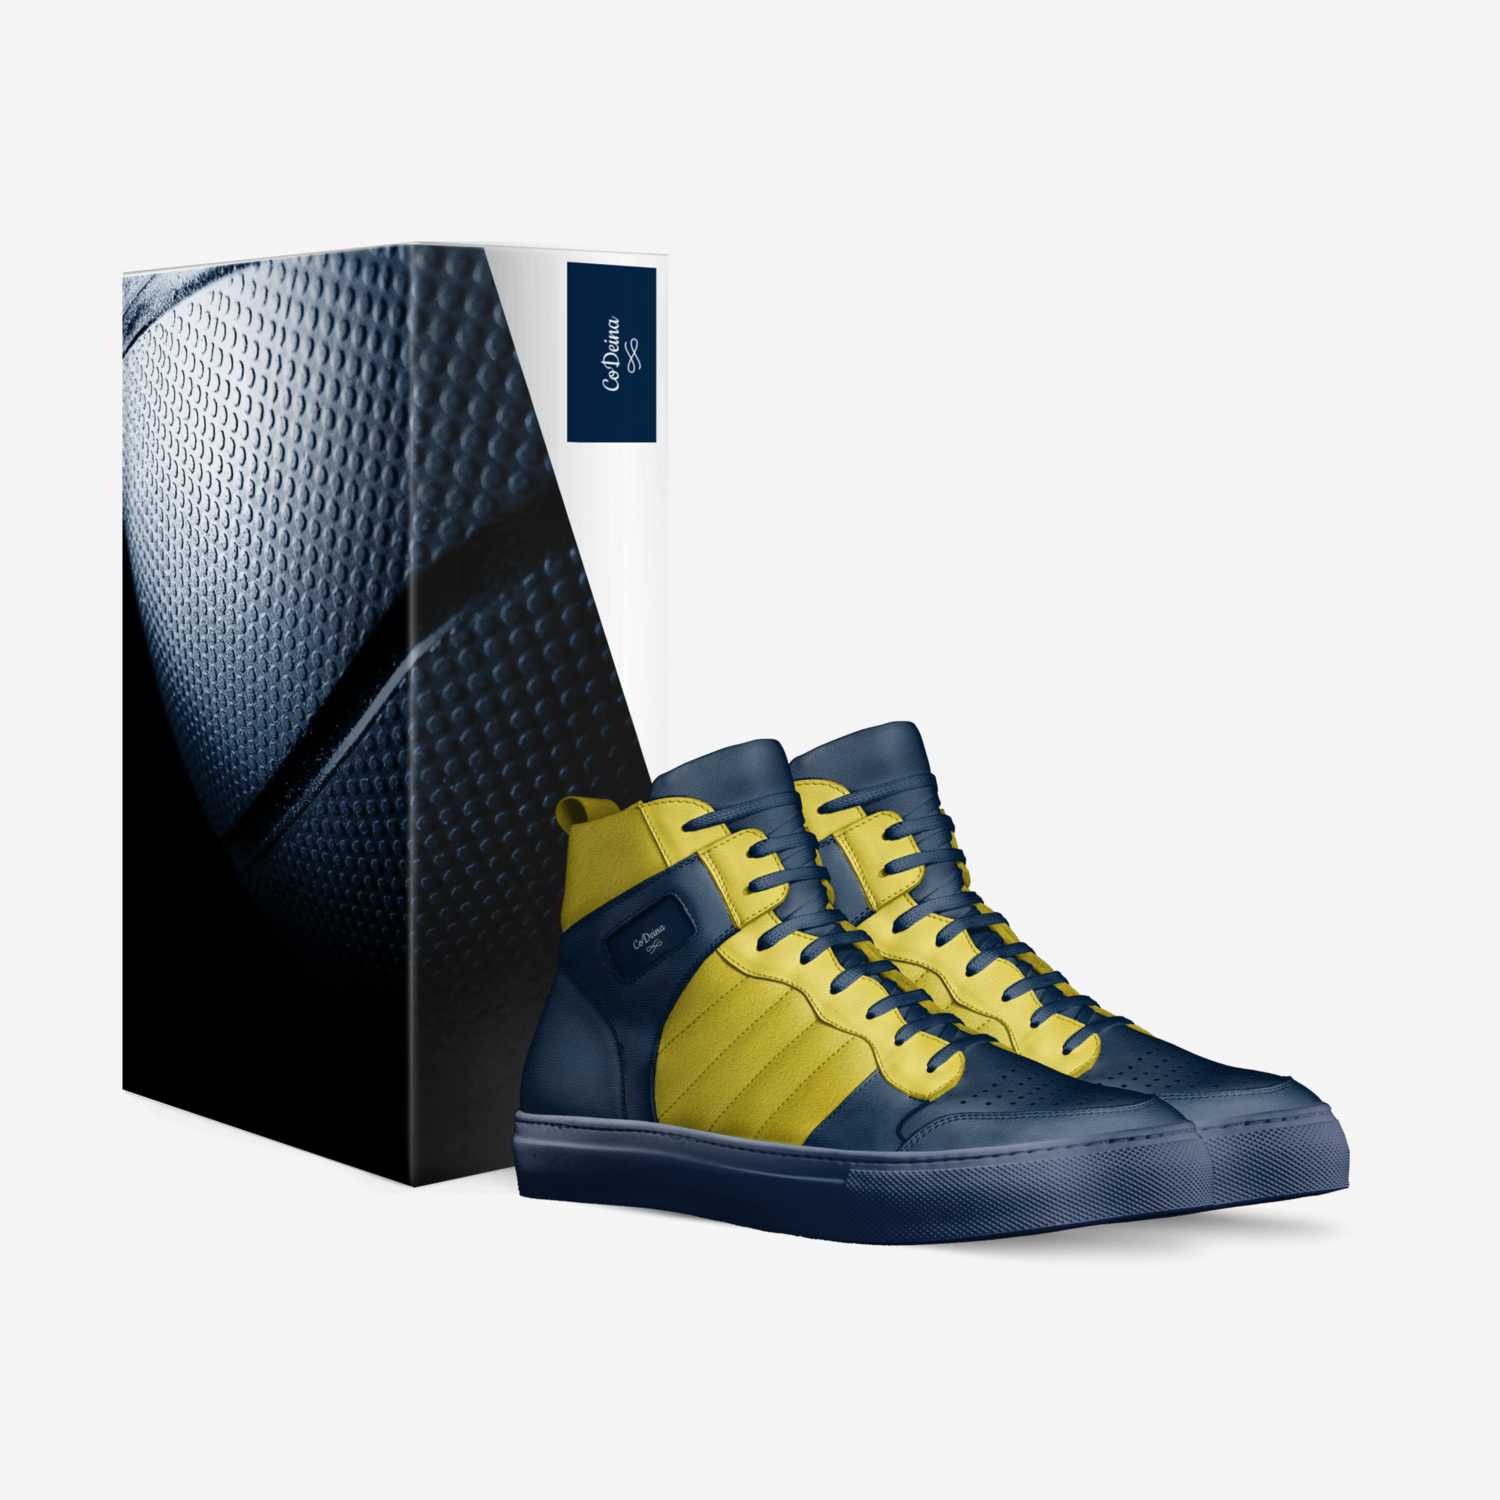 CoDeina custom made in Italy shoes by Lawrence Johnson | Box view